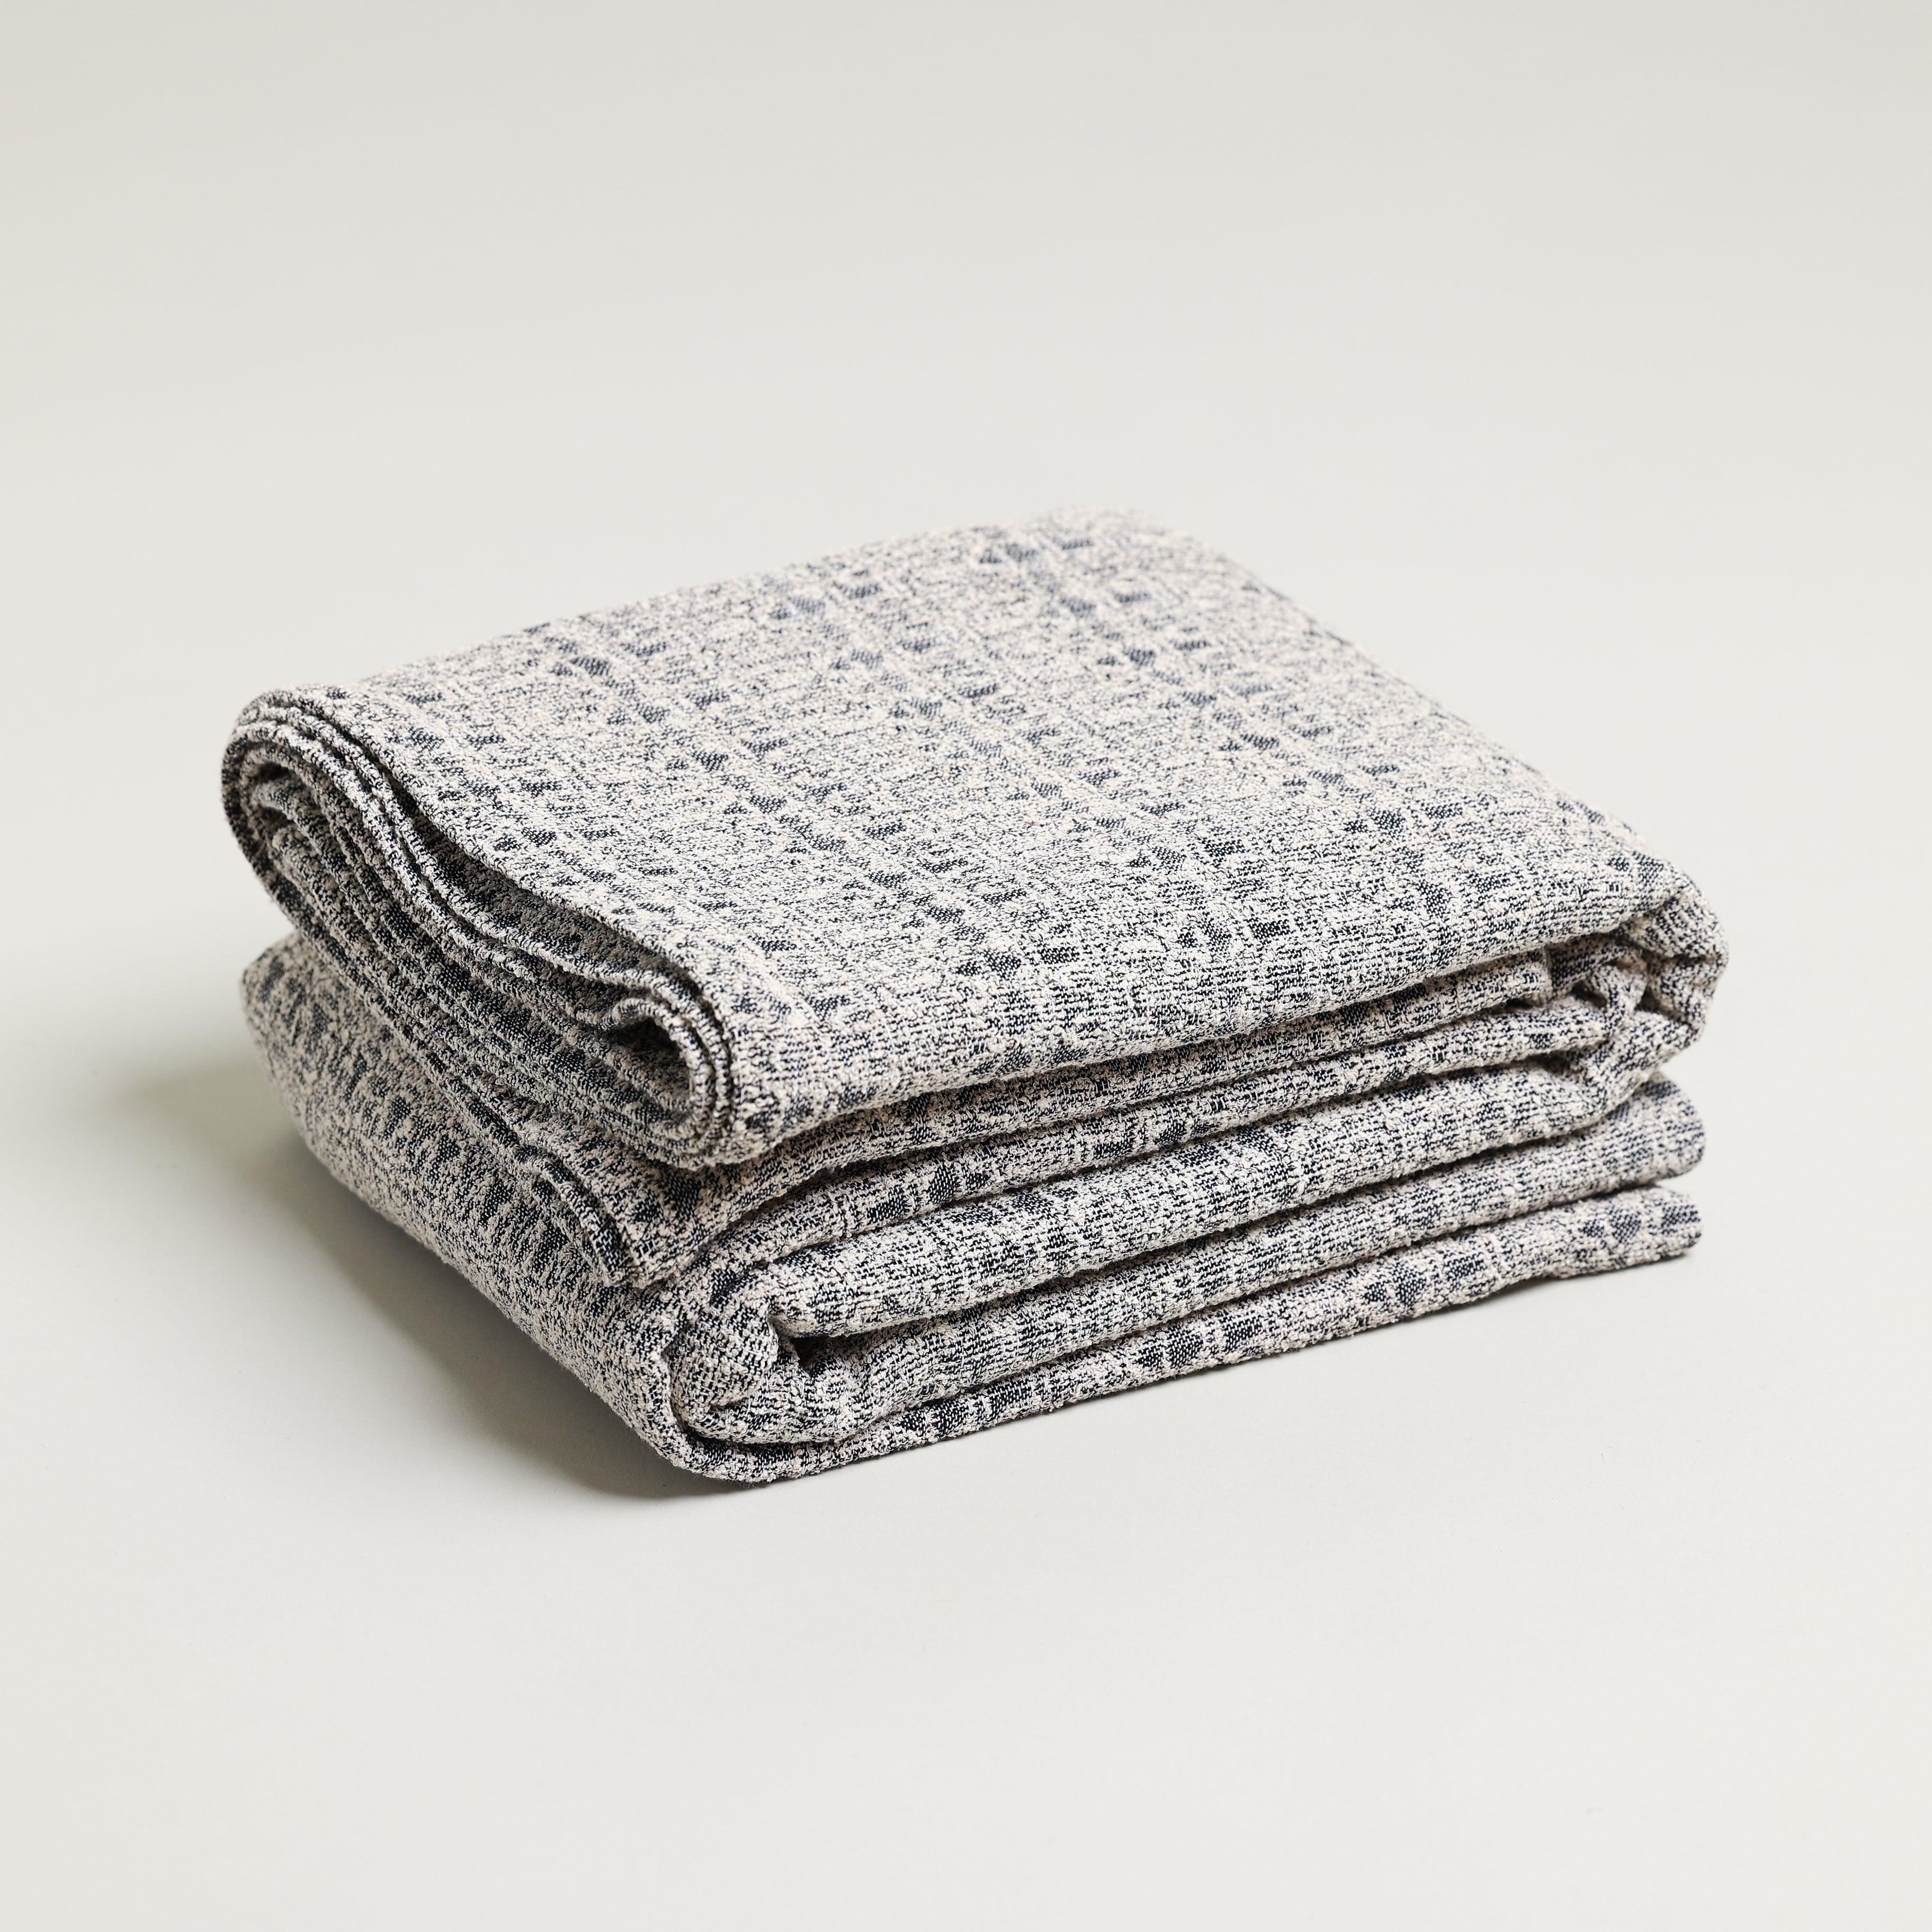 Grey and white boucle jacquard throw blanket